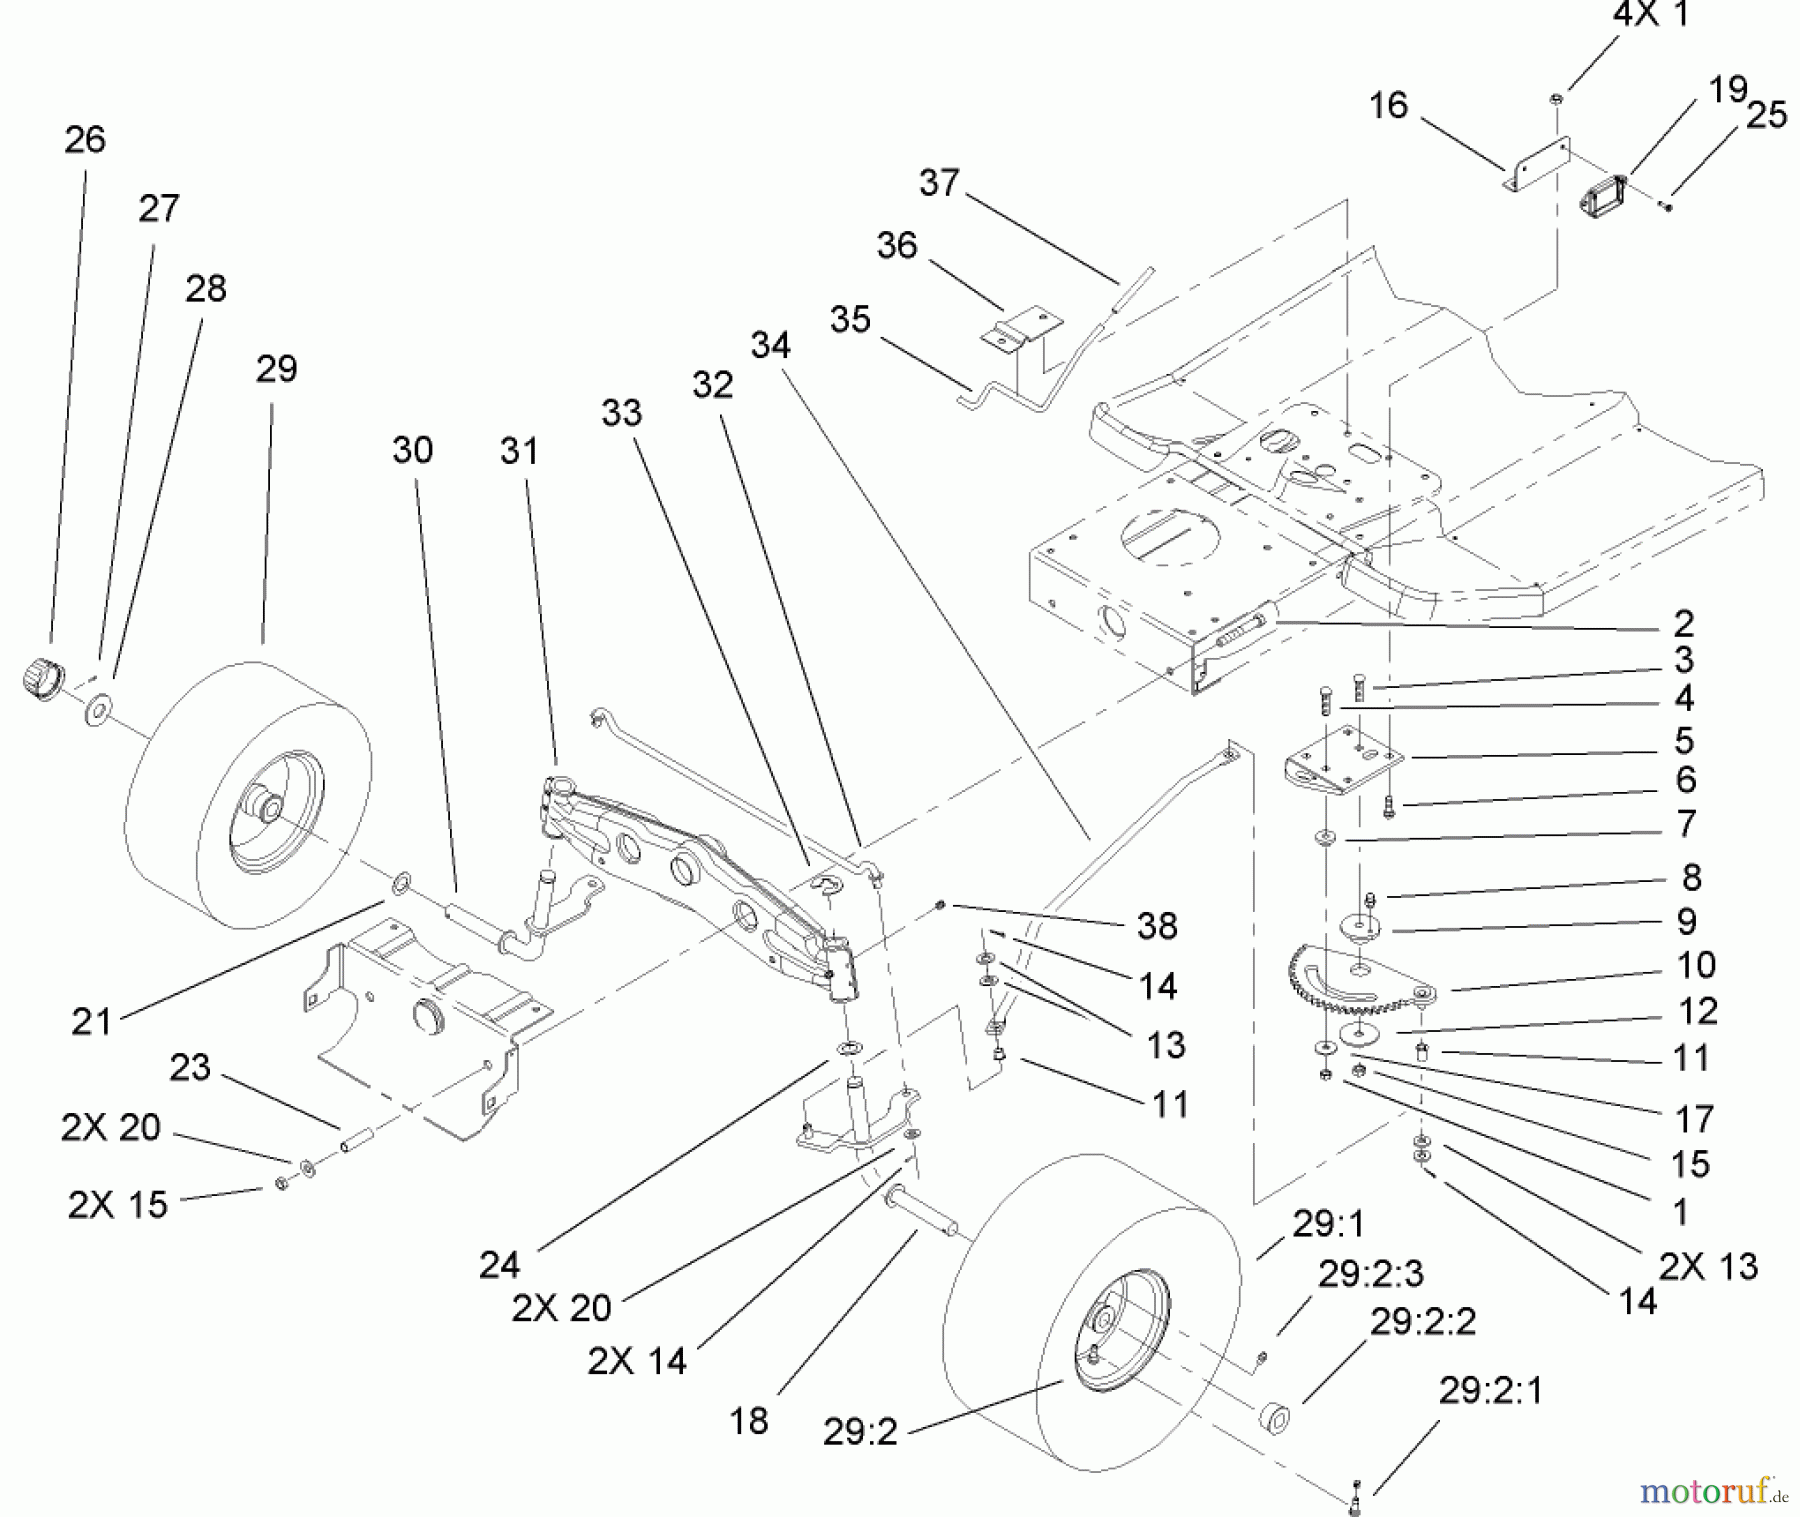  Toro Neu Mowers, Lawn & Garden Tractor Seite 1 71209 (XL 320) - Toro XL 320 Lawn Tractor, 2005 (250000001-250005000) STEERING COMPONENT ASSEMBLY